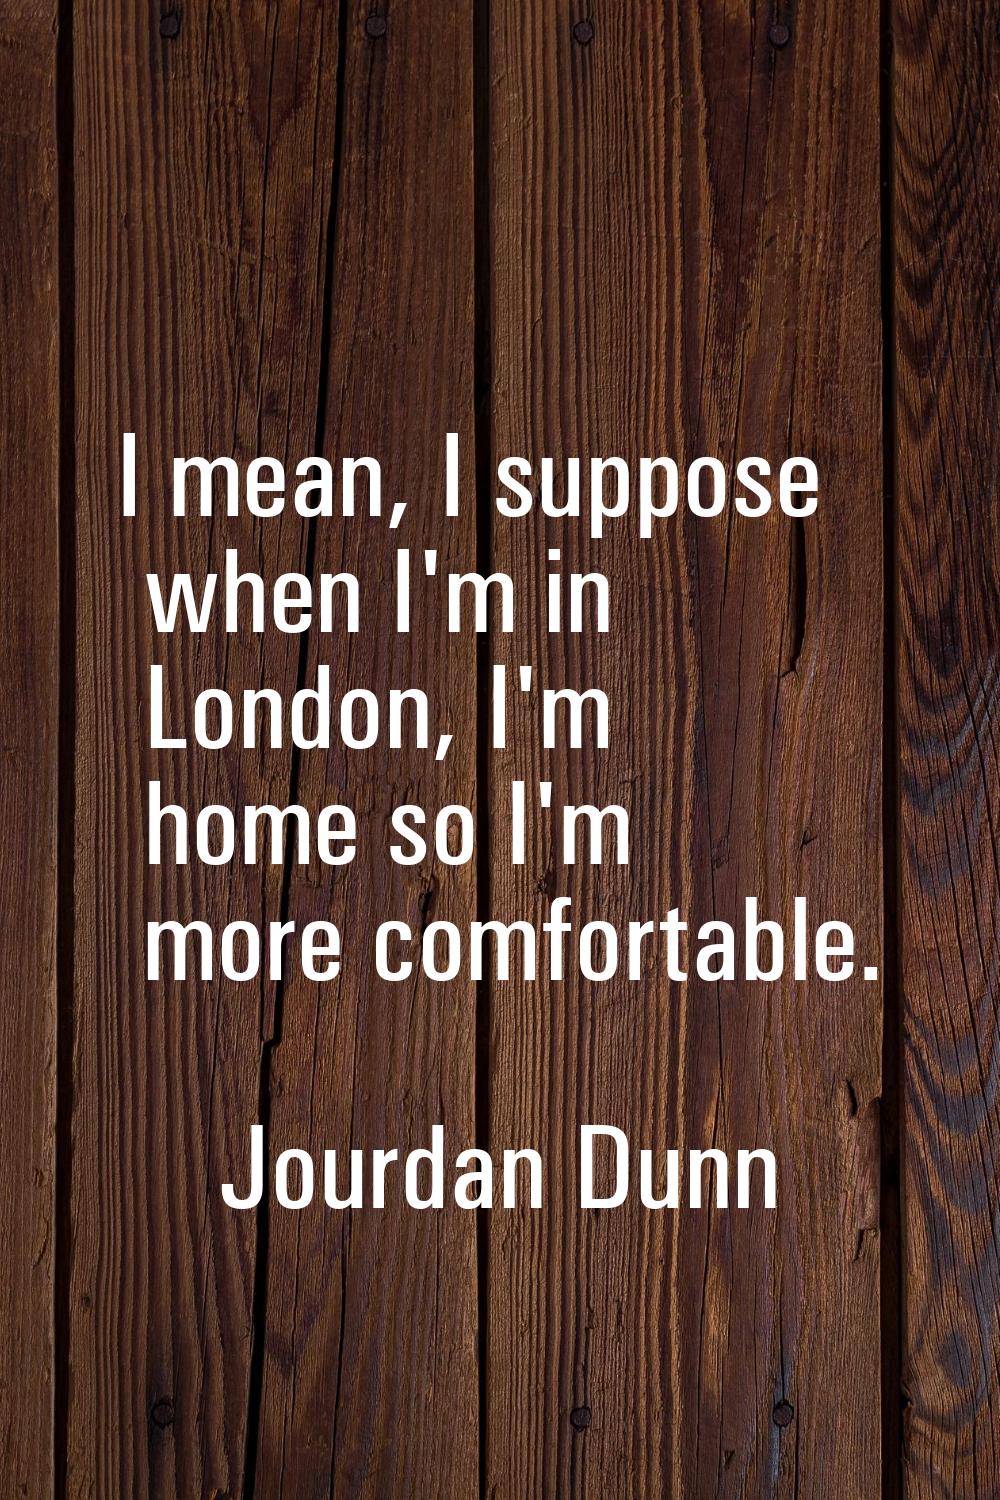 I mean, I suppose when I'm in London, I'm home so I'm more comfortable.